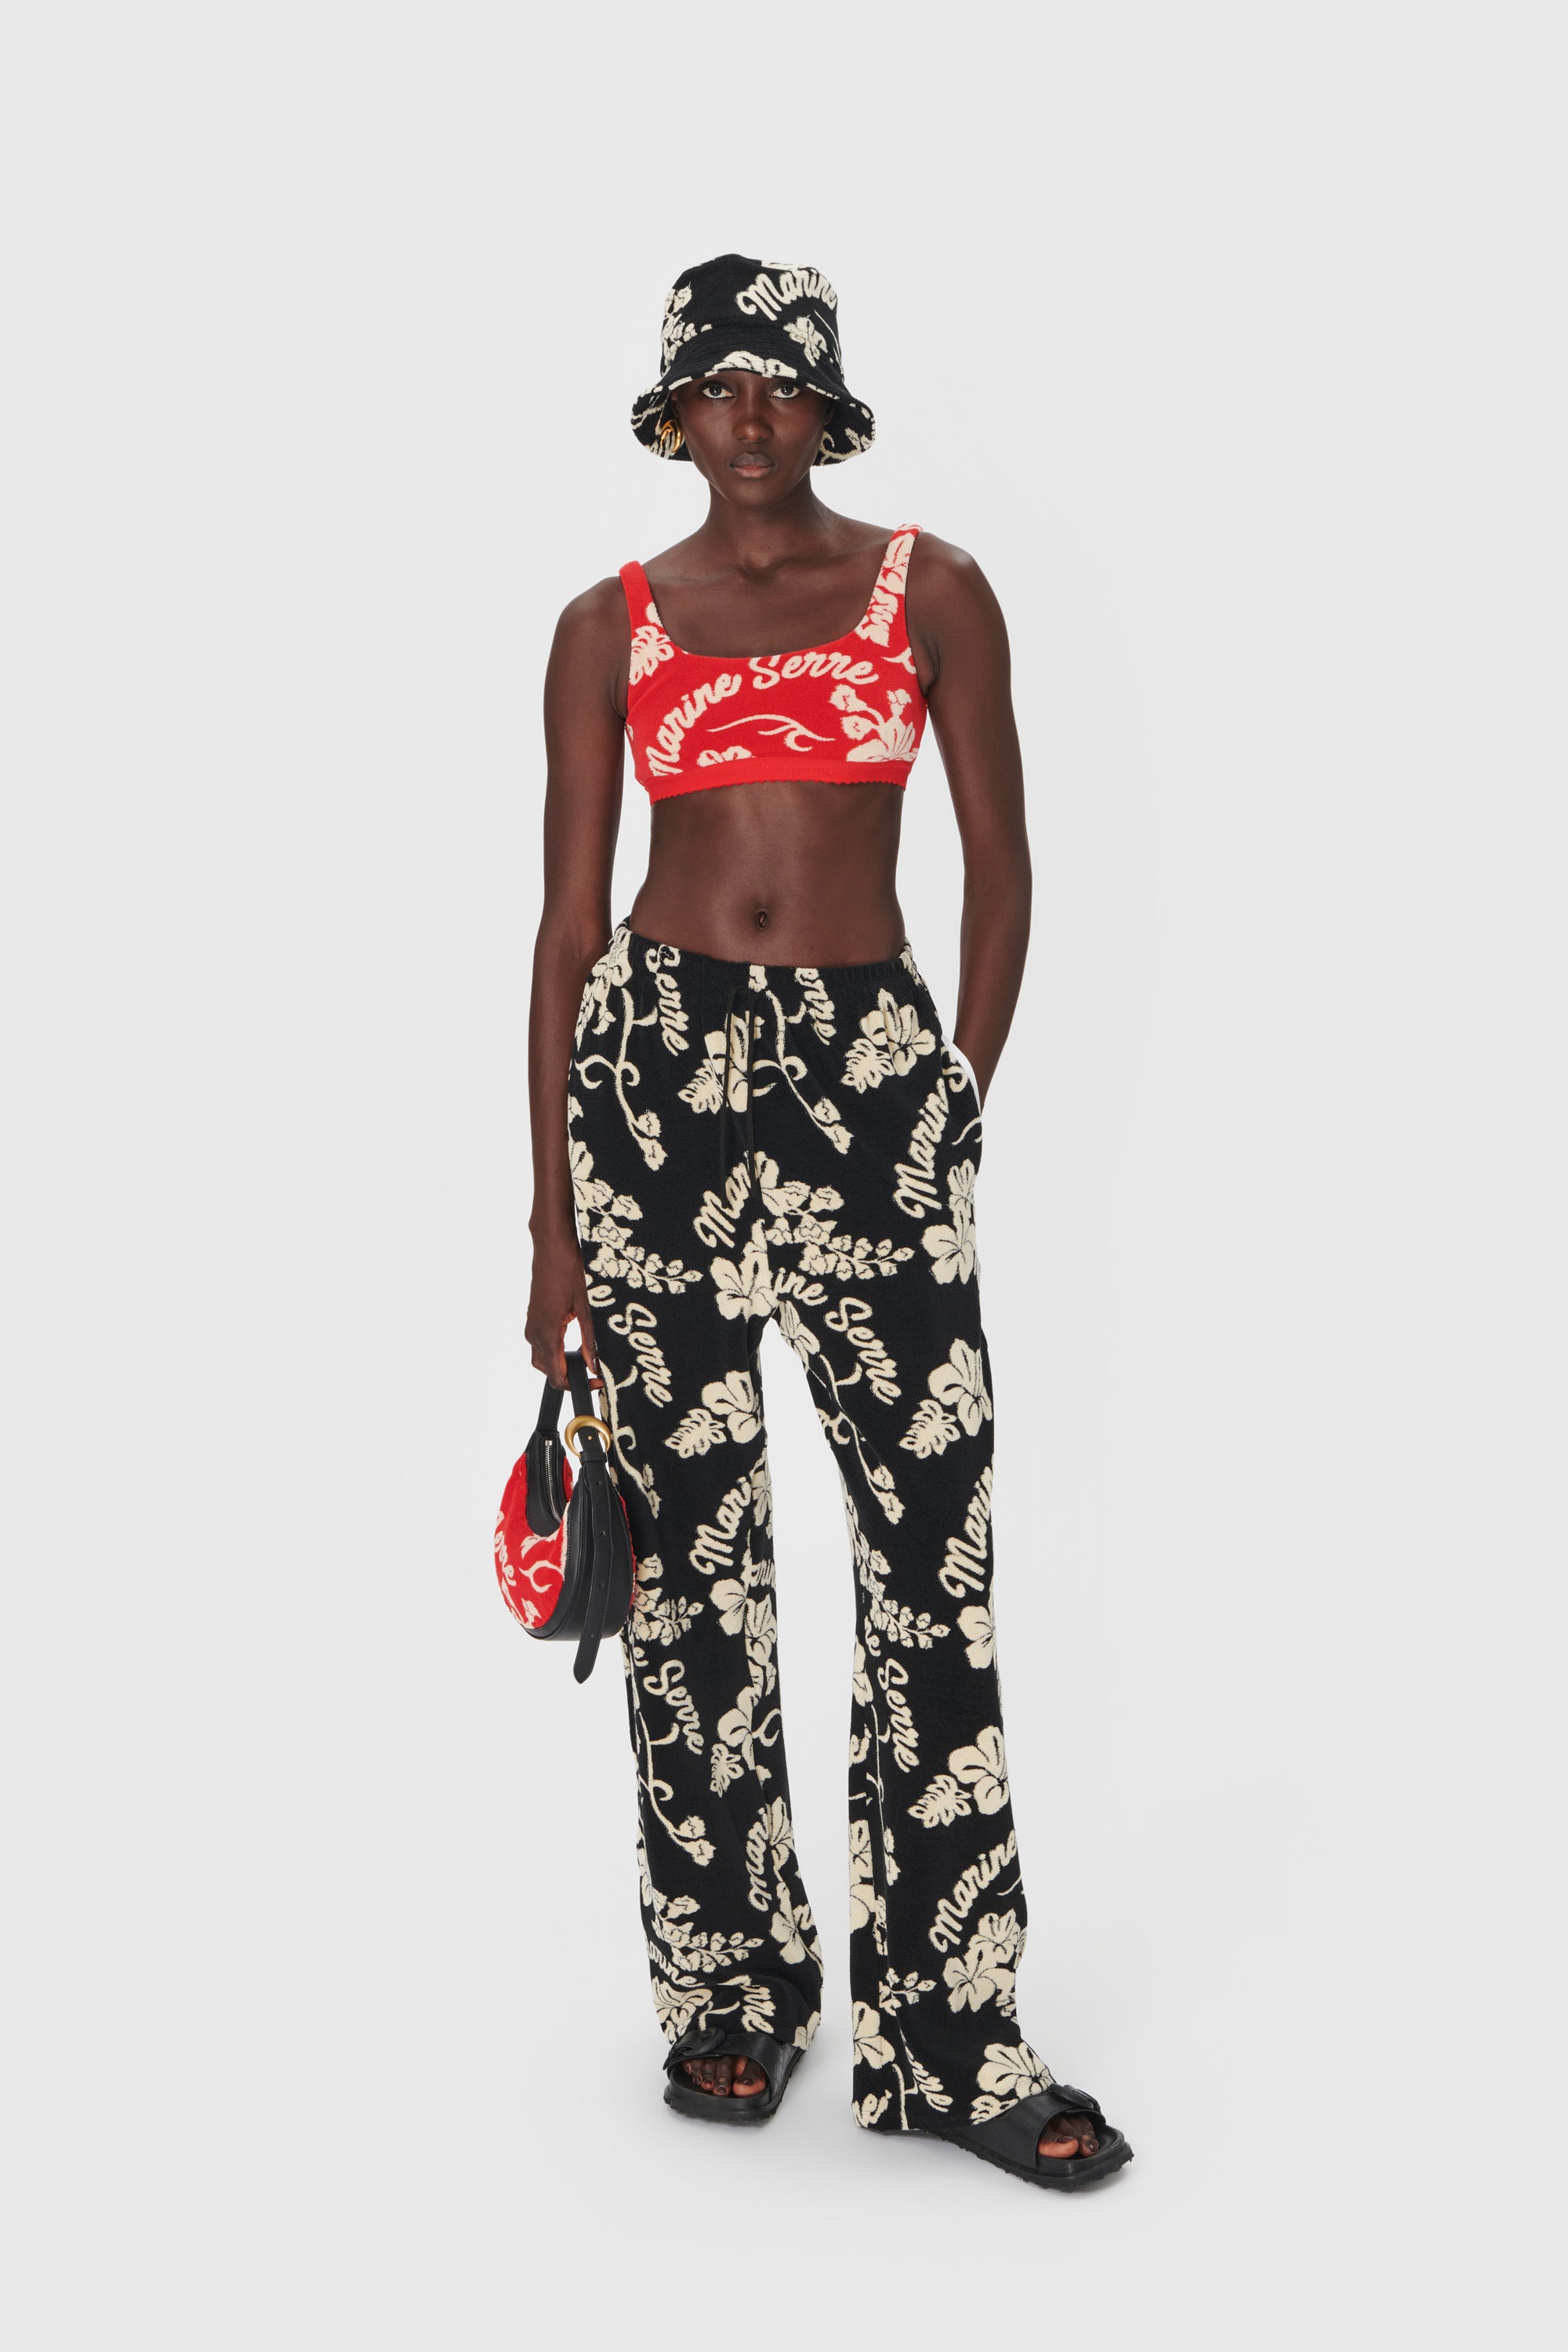 Marine Serre - MOON SPONGE JACQUARD LOUNGE PANTS  HBX - Globally Curated  Fashion and Lifestyle by Hypebeast